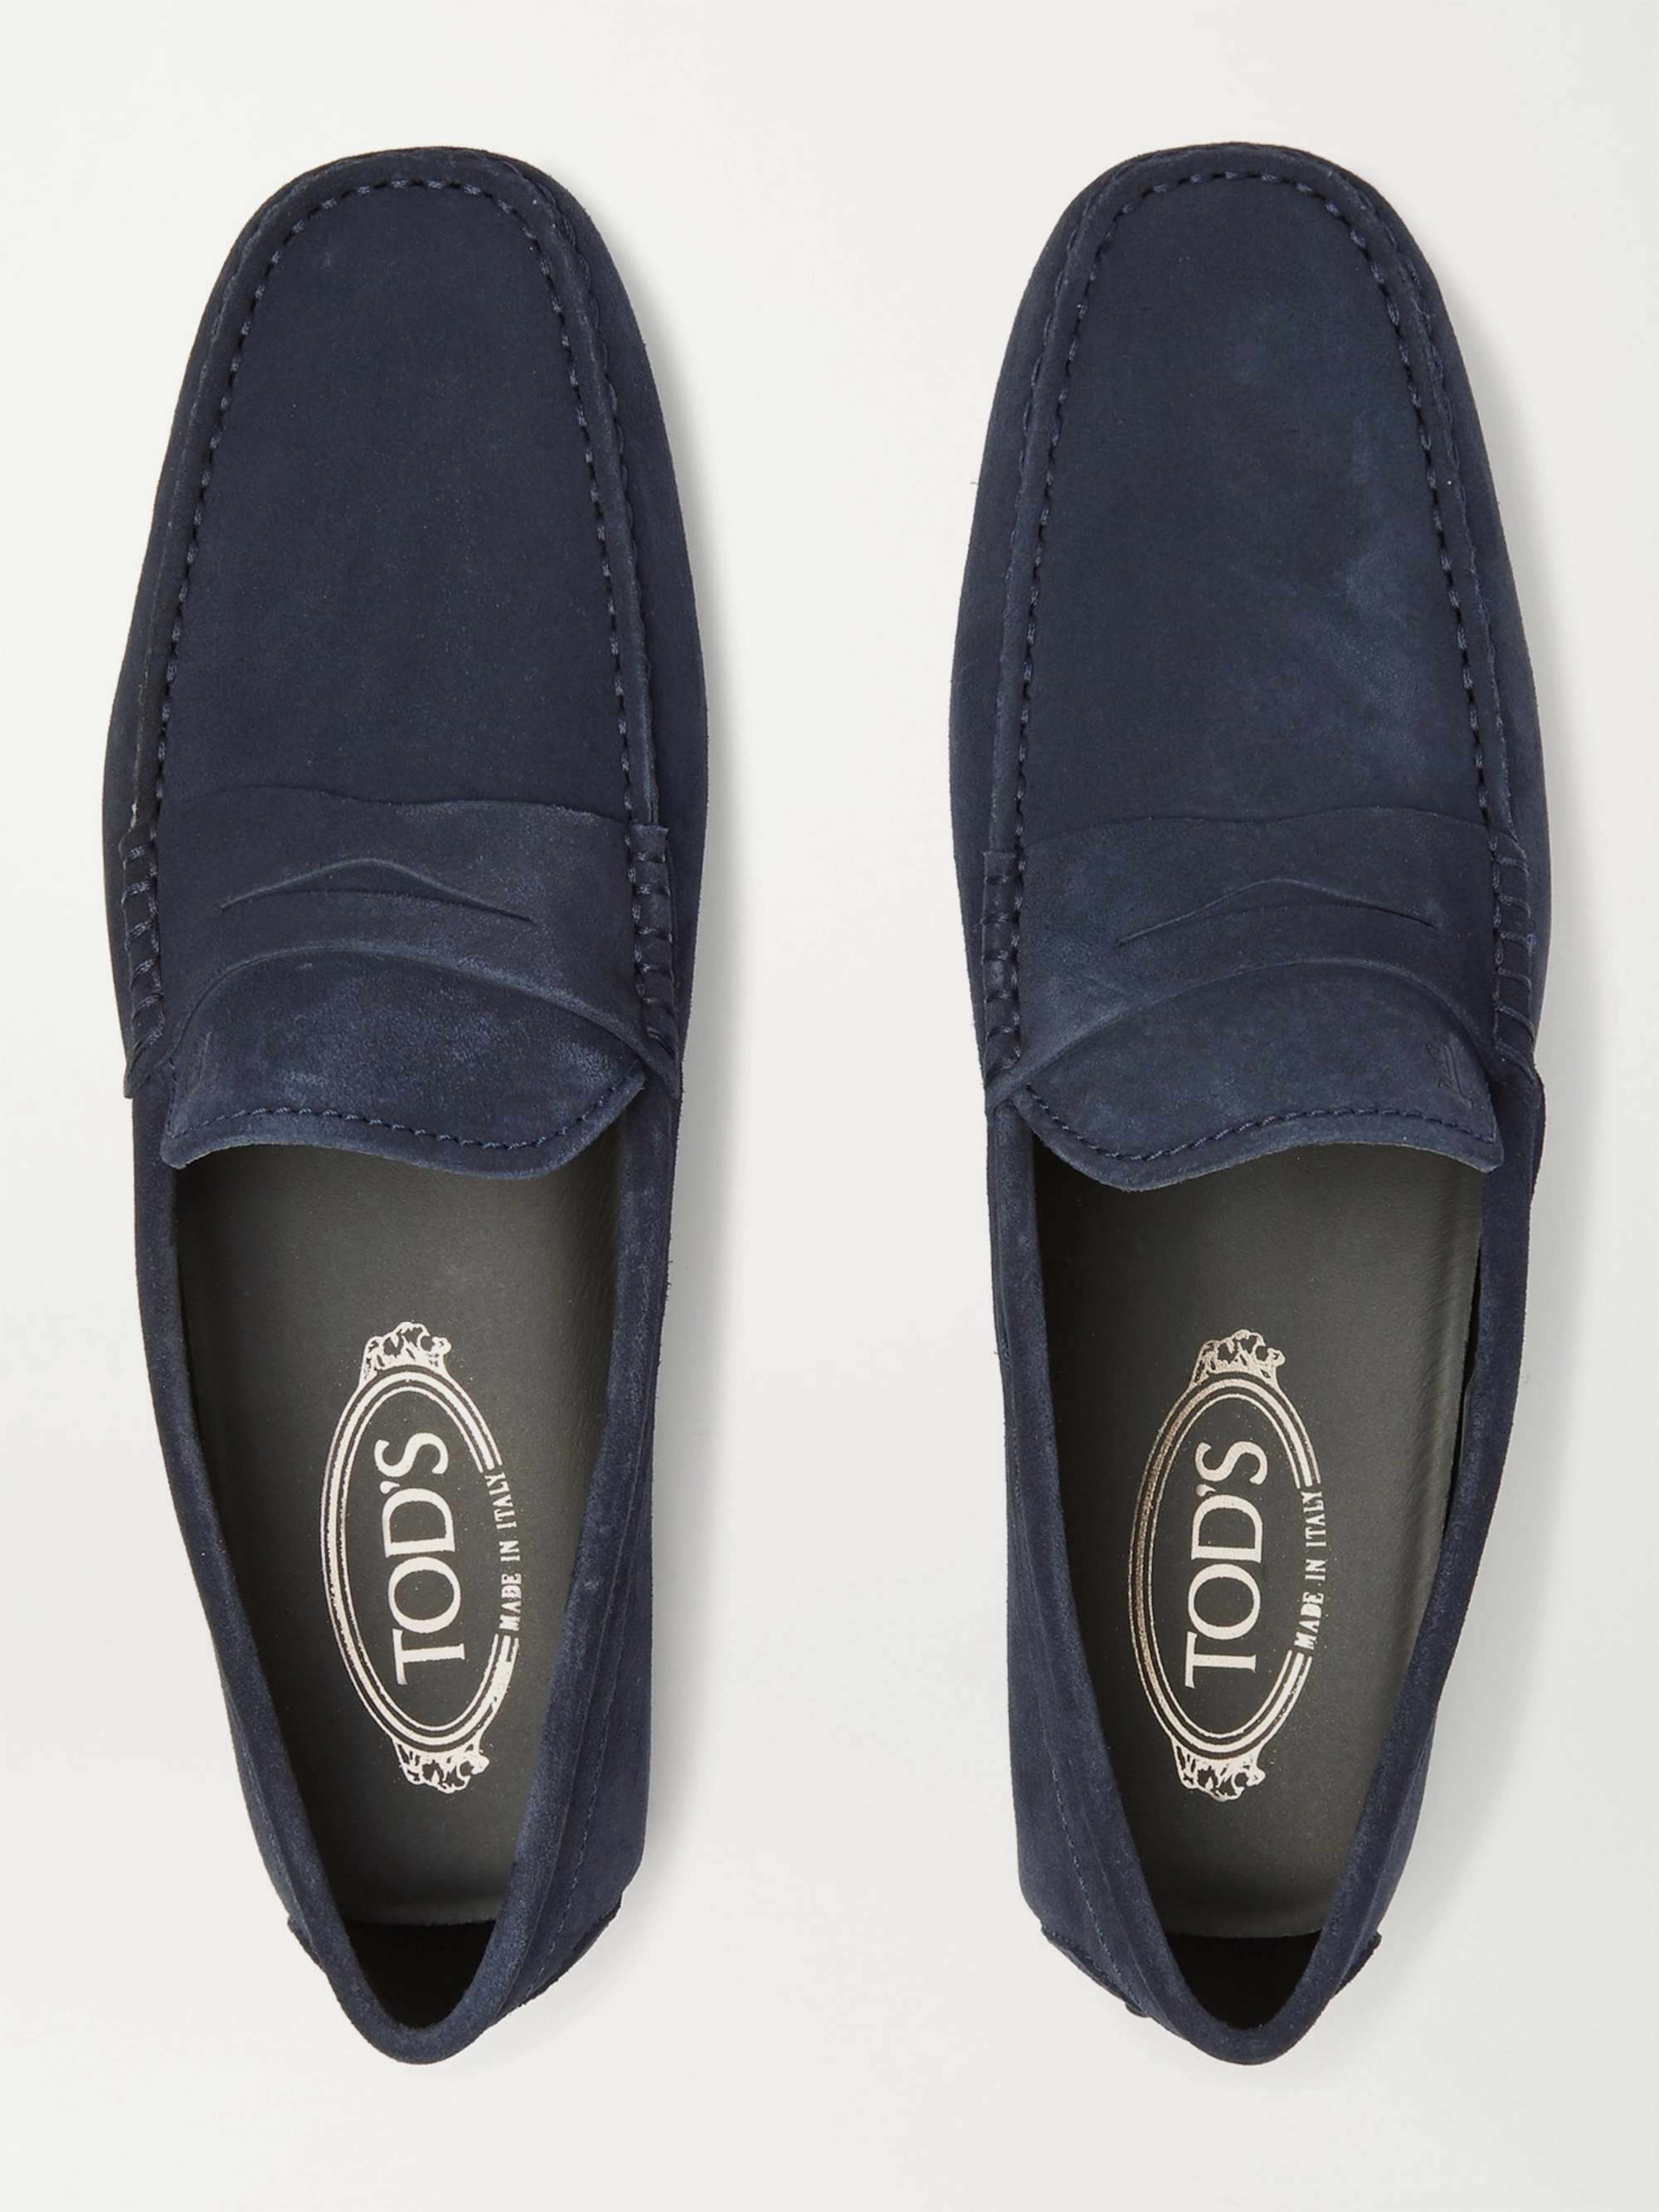 TOD'S Gommino Suede Driving Shoes for MR PORTER